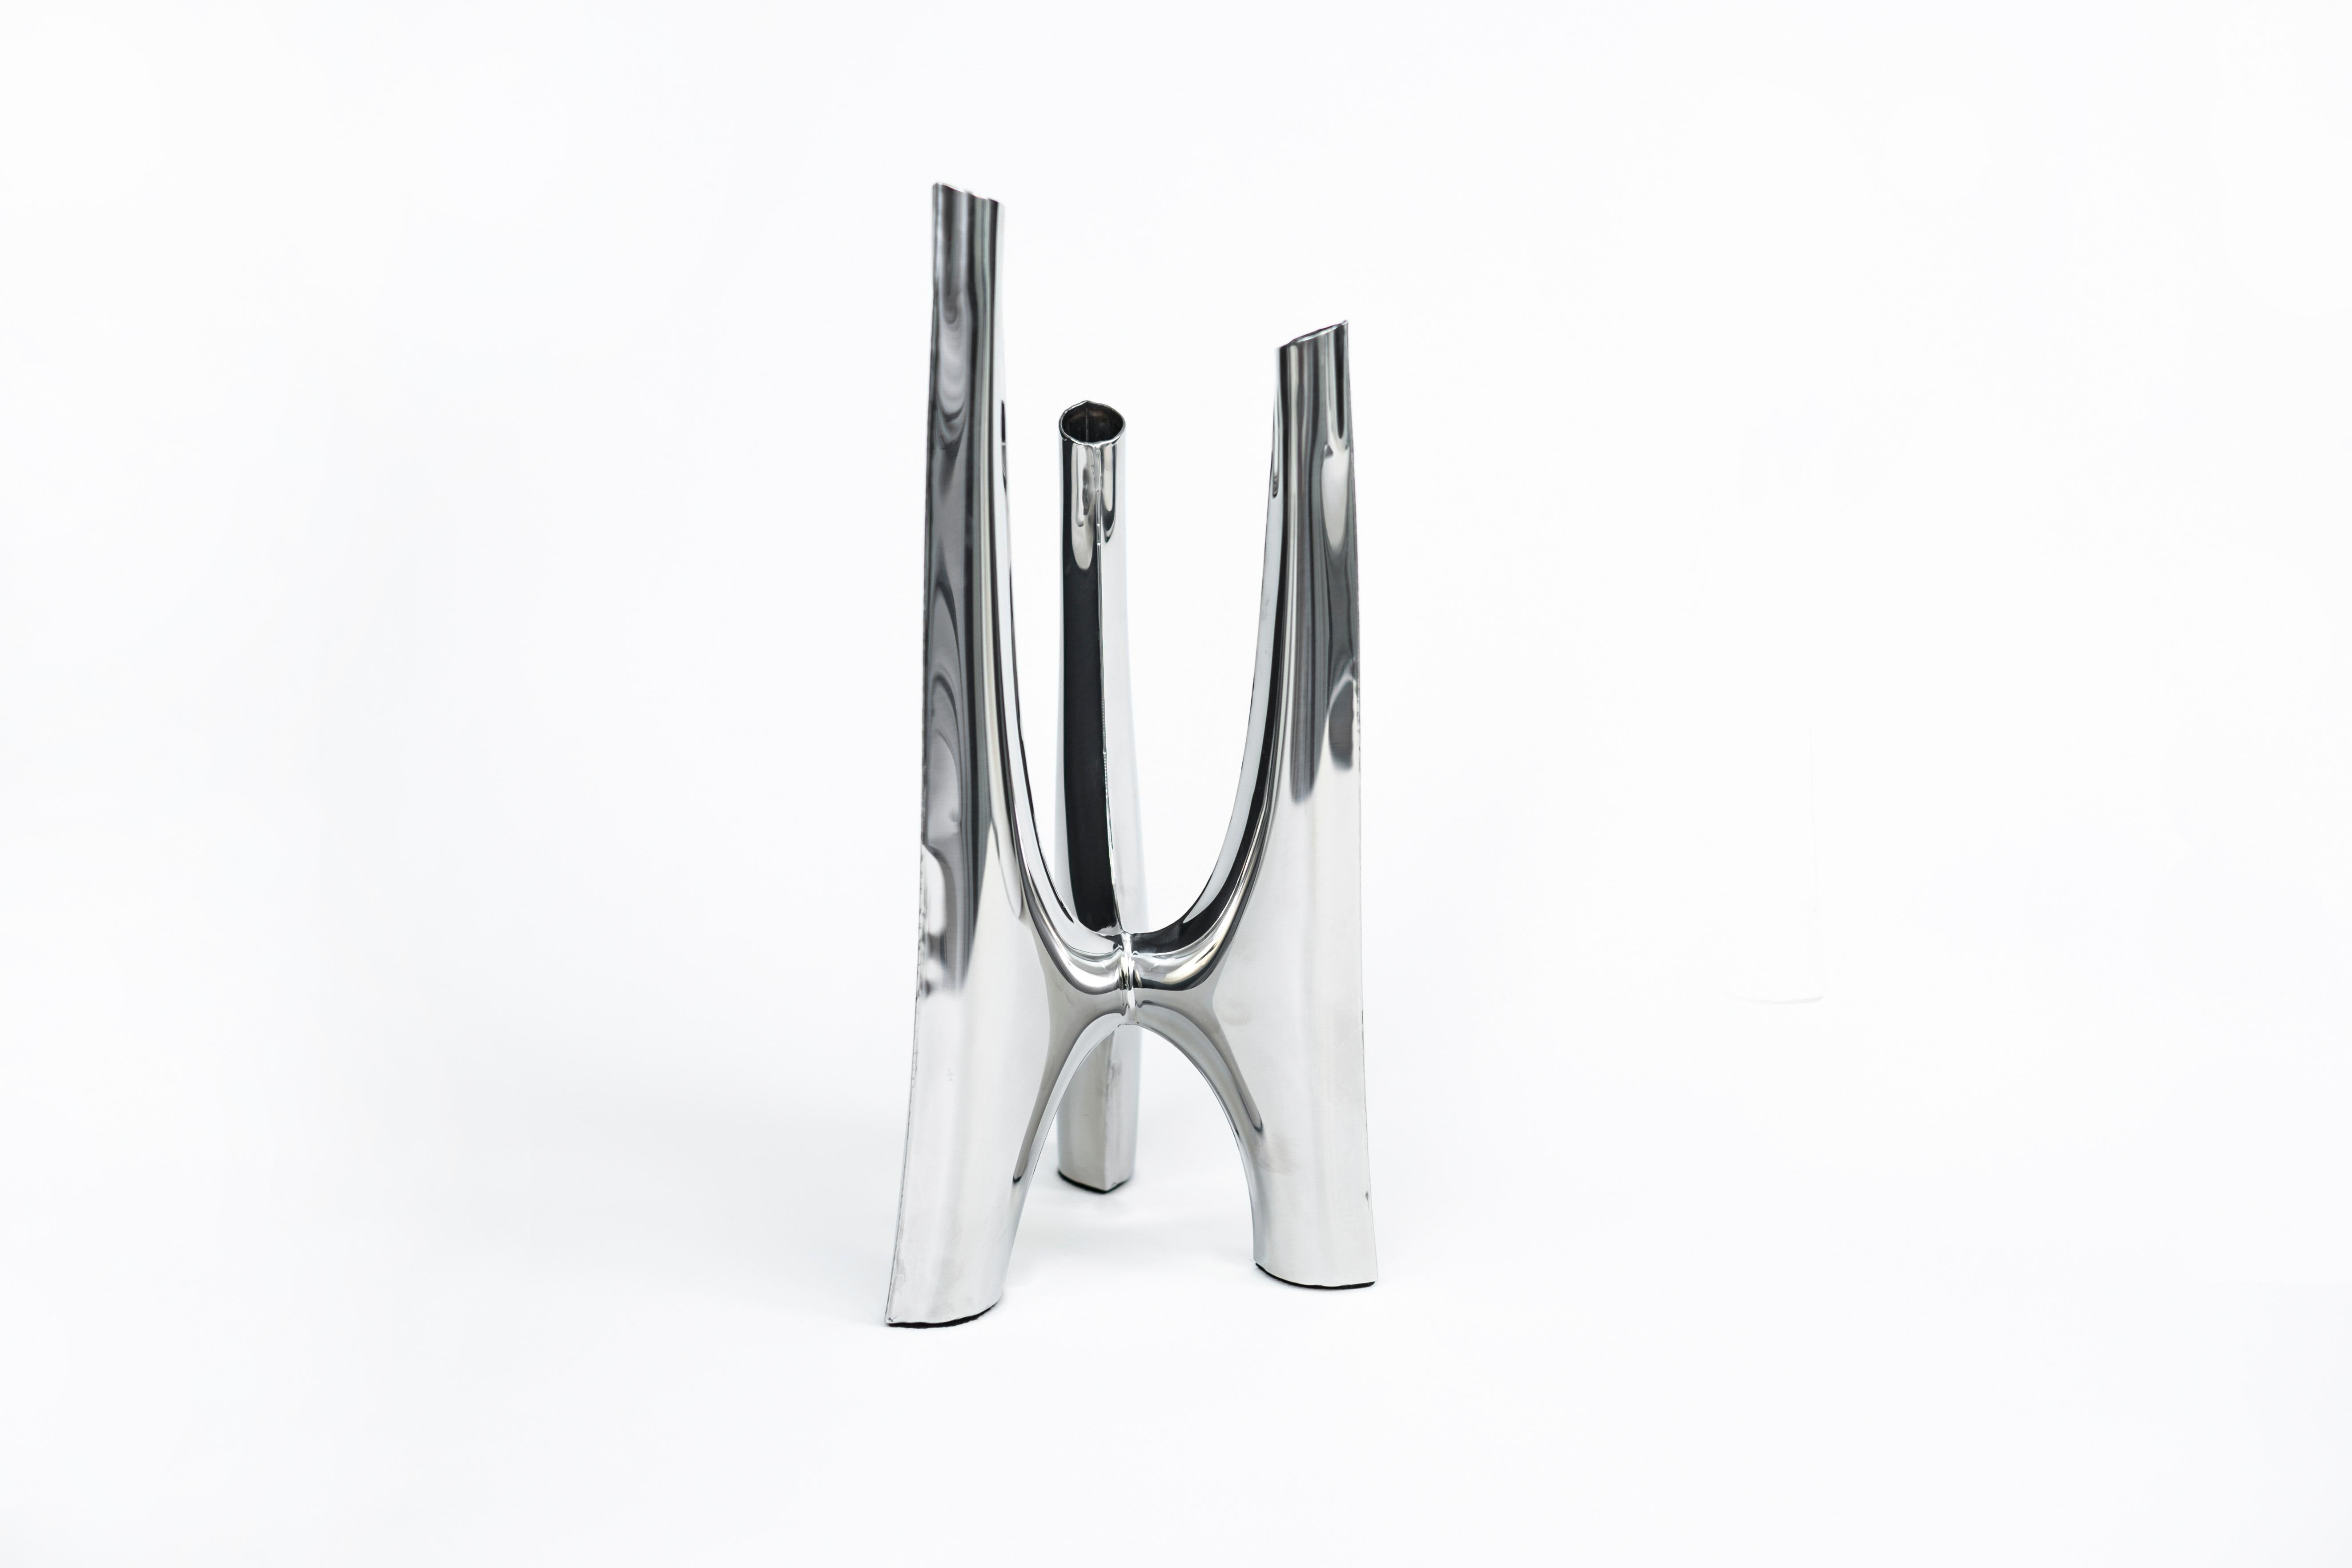 Triglav- Candelabrum, large
Original piece by Zieta, delivered with certificate. 

Polished stainless steel
Candles included

Measures: H83 x 40 cm.